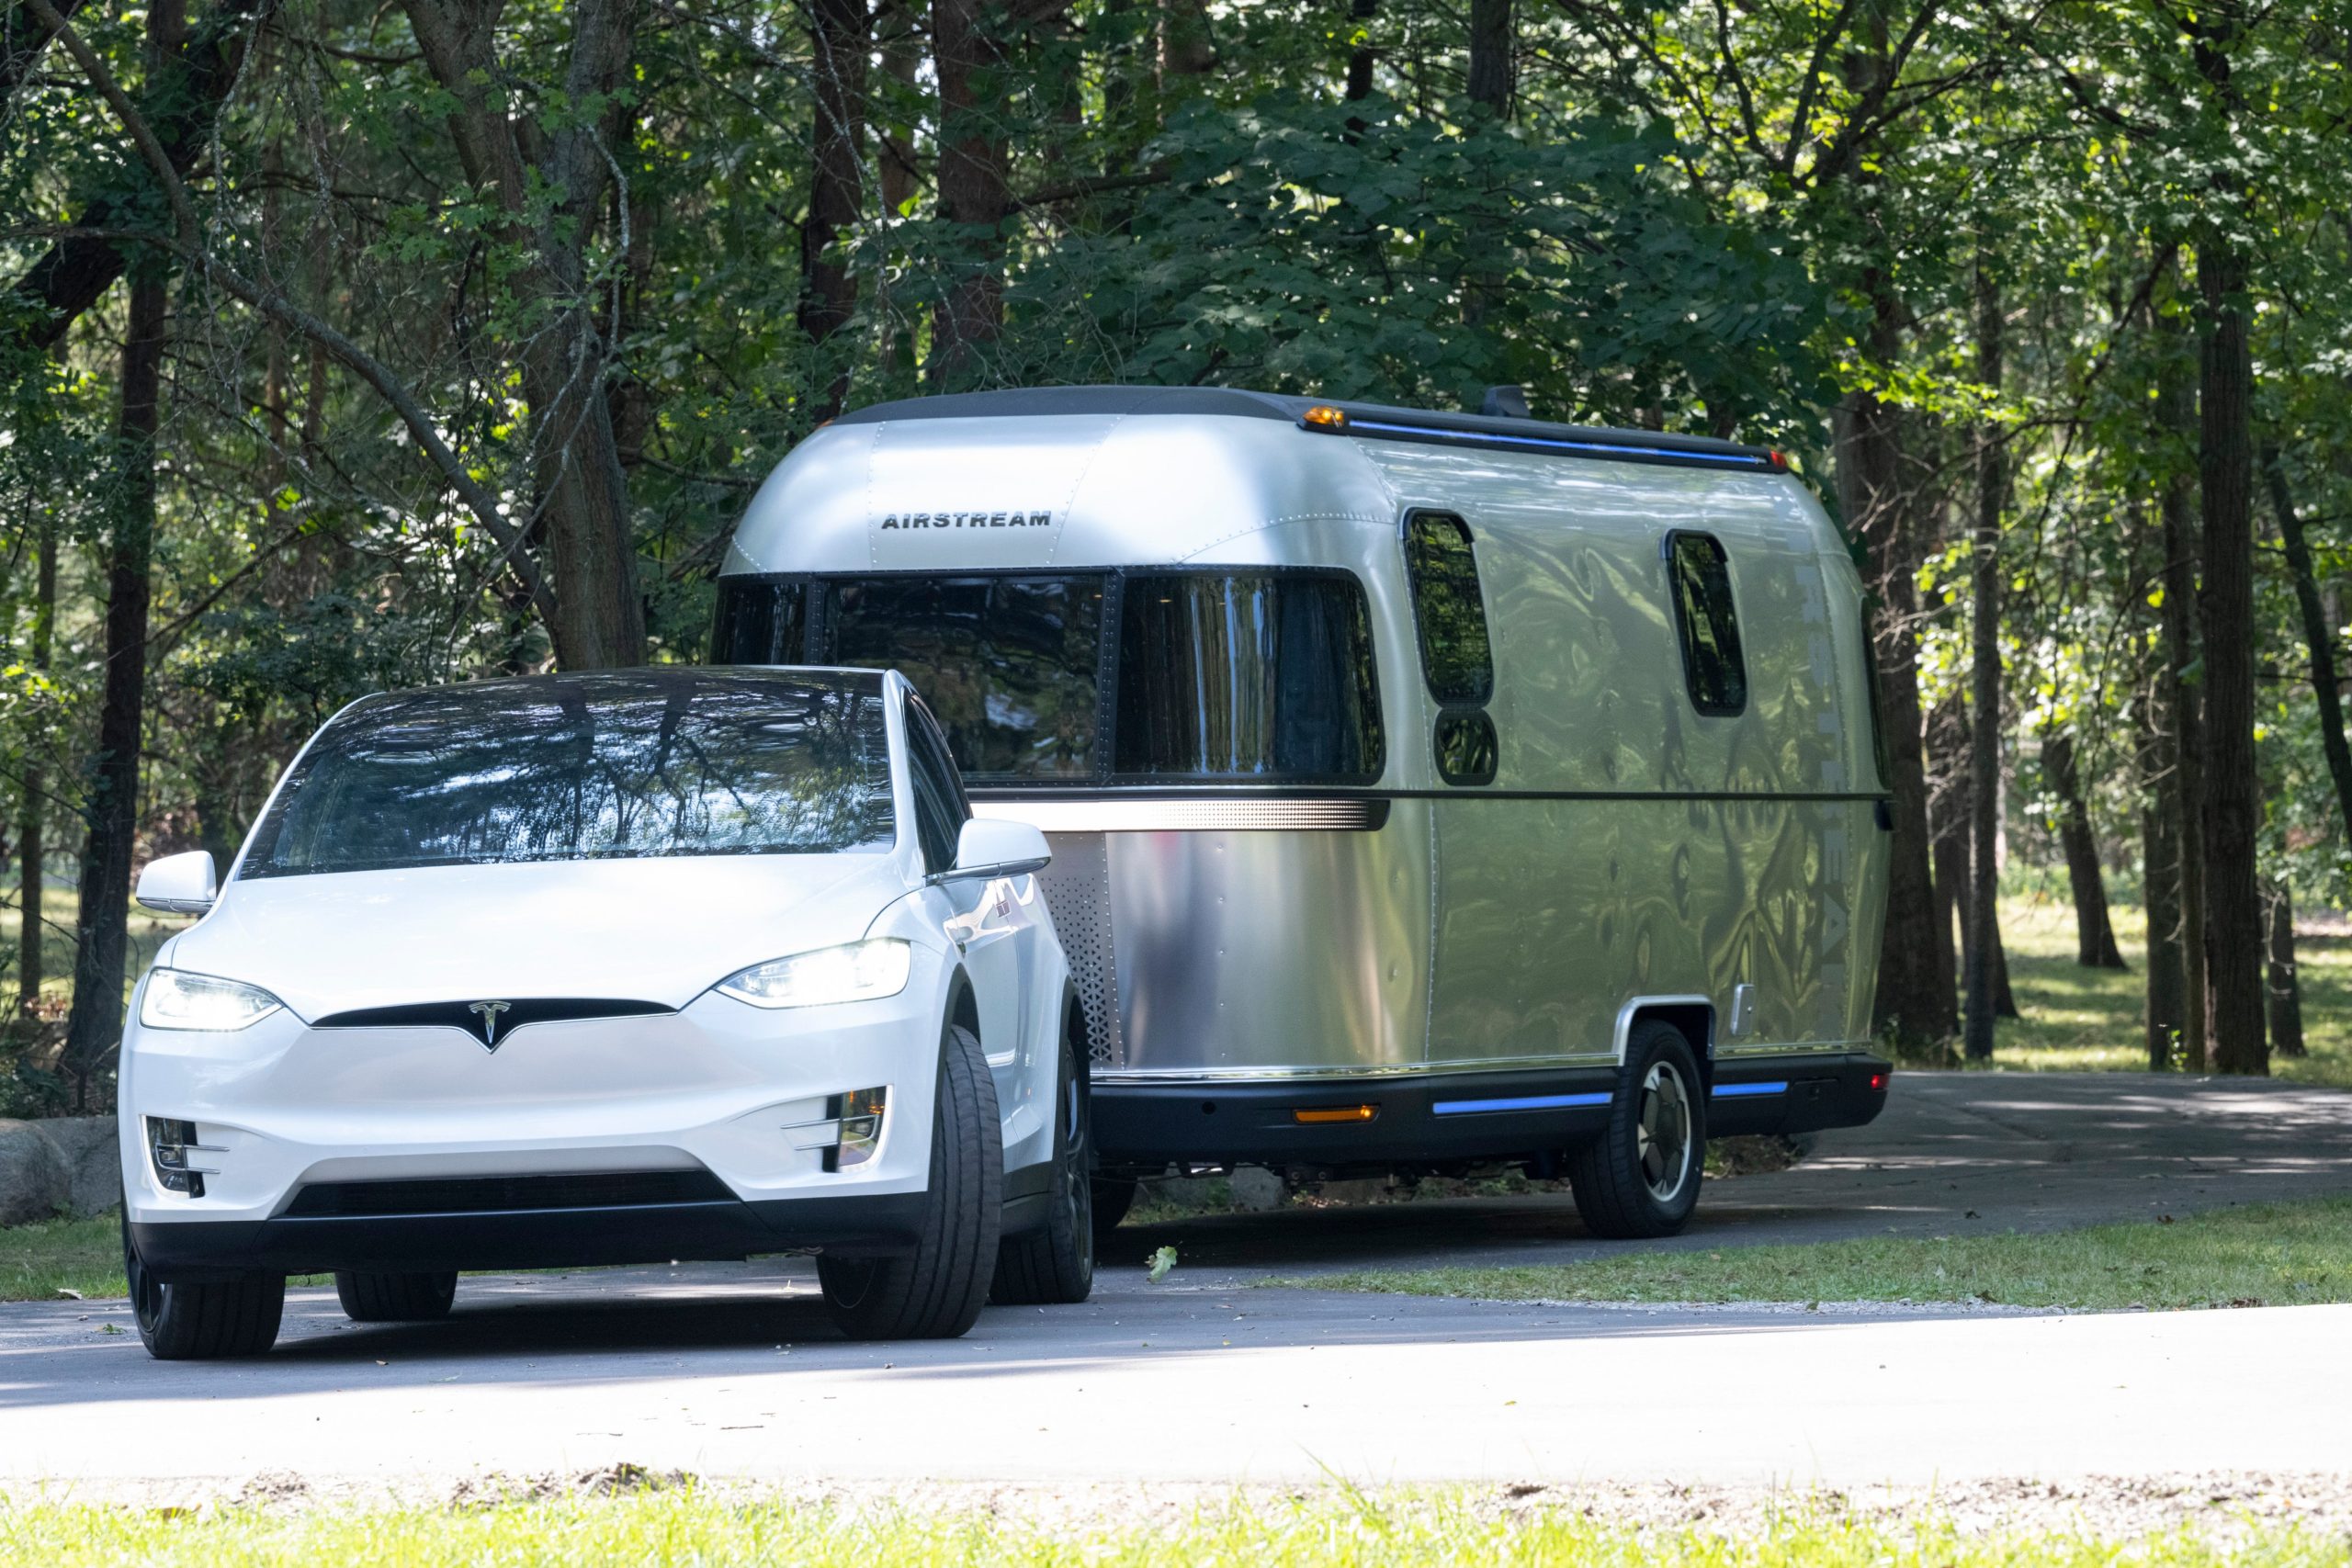 Airstream’s Electric Camper Fixes The Most Annoying Issues With Towing